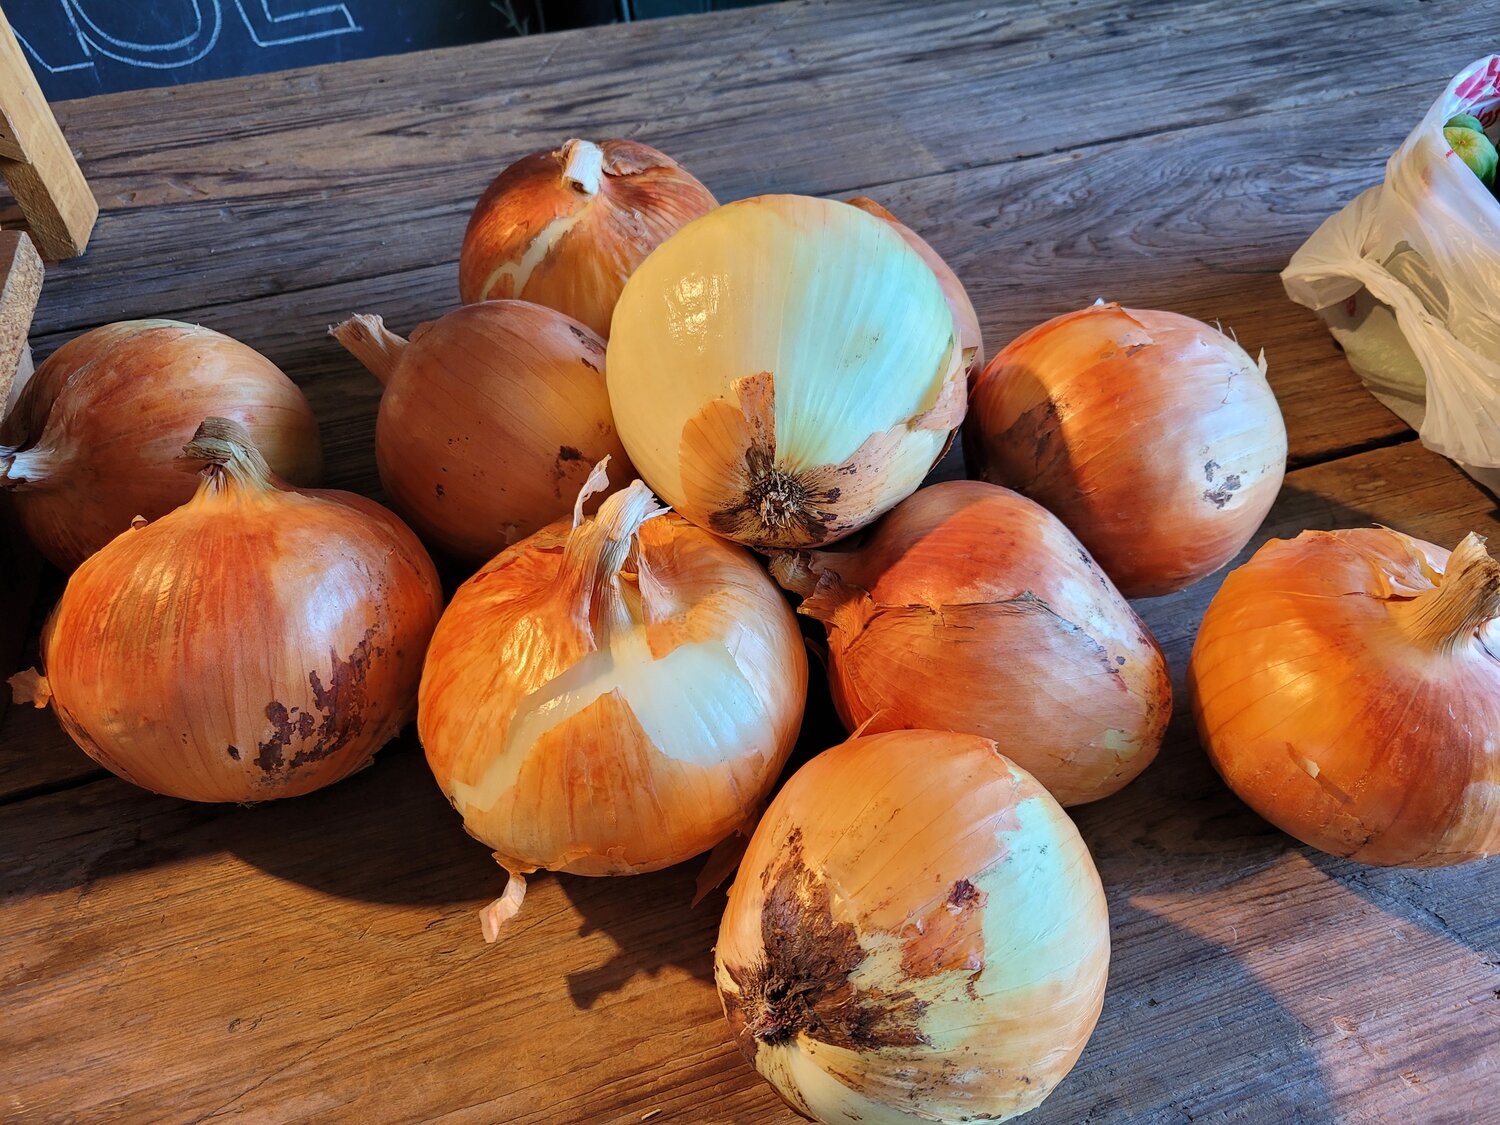 Mike Fournier grew these onions found at the Plumsteadville Grange Farmers Market.